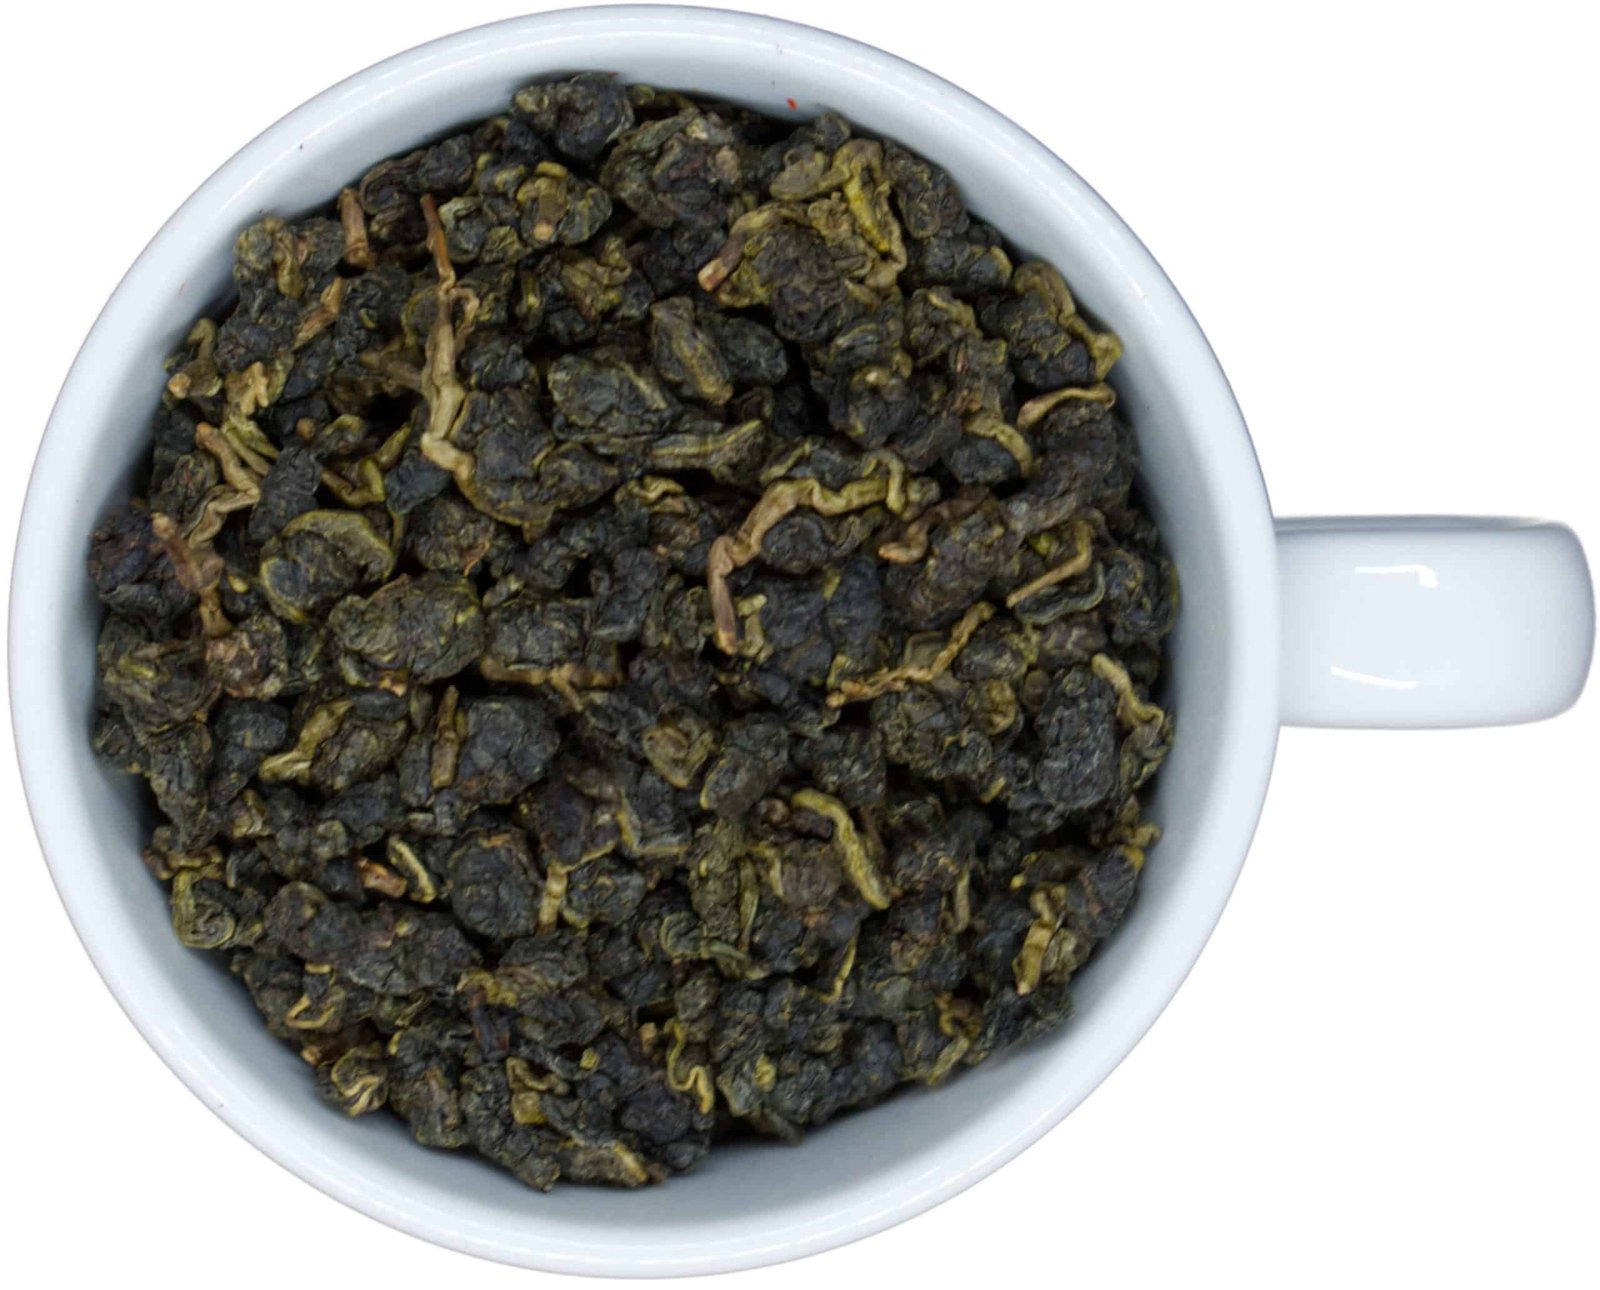 Halbfermentierter Tee Tung Ting Oolong scaled